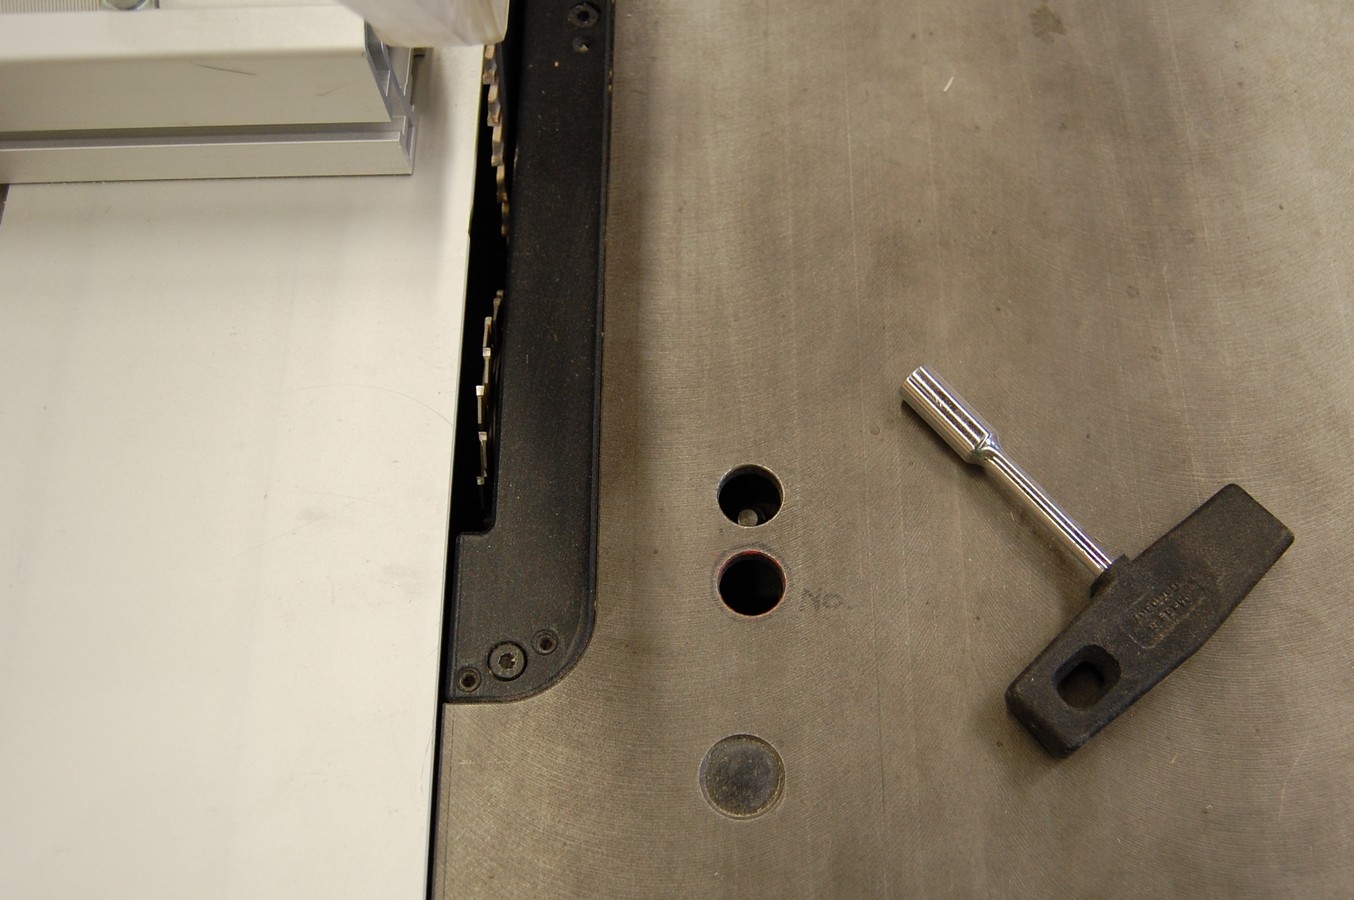 Looking down at the scoring blade adjustment access and wrench